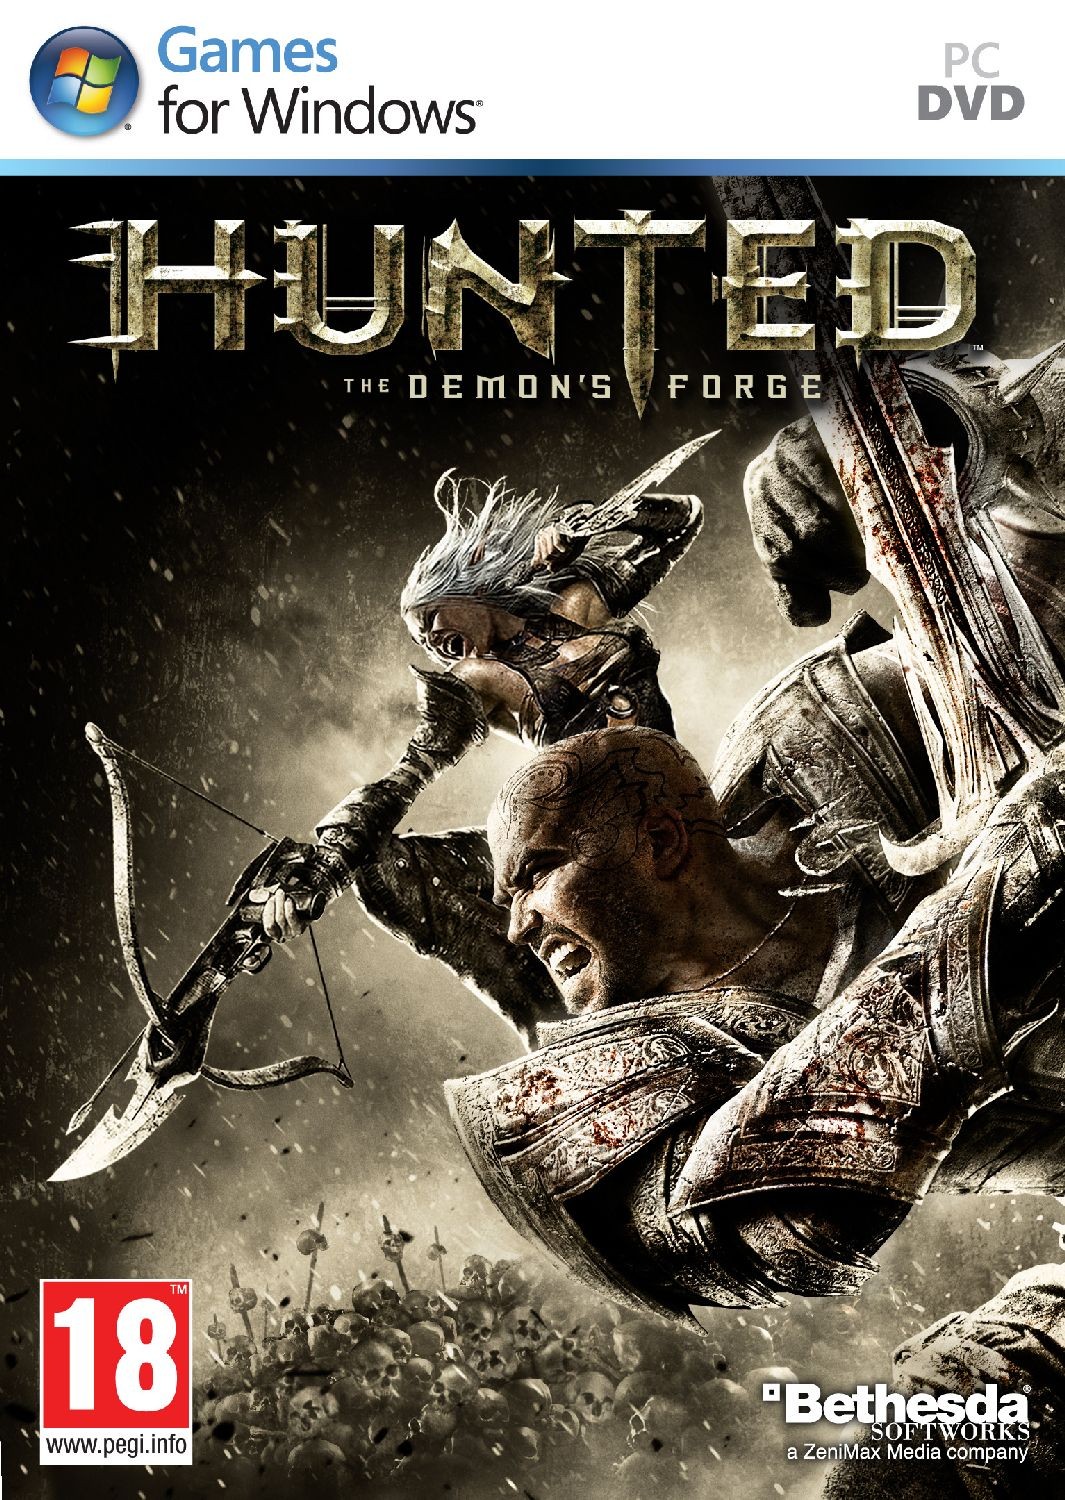 http://img.jeuxactus.com/datas/images/jeux/Hunted__The_Demons_Forge_/packaging/xl/4db9921ebf00c.jpg